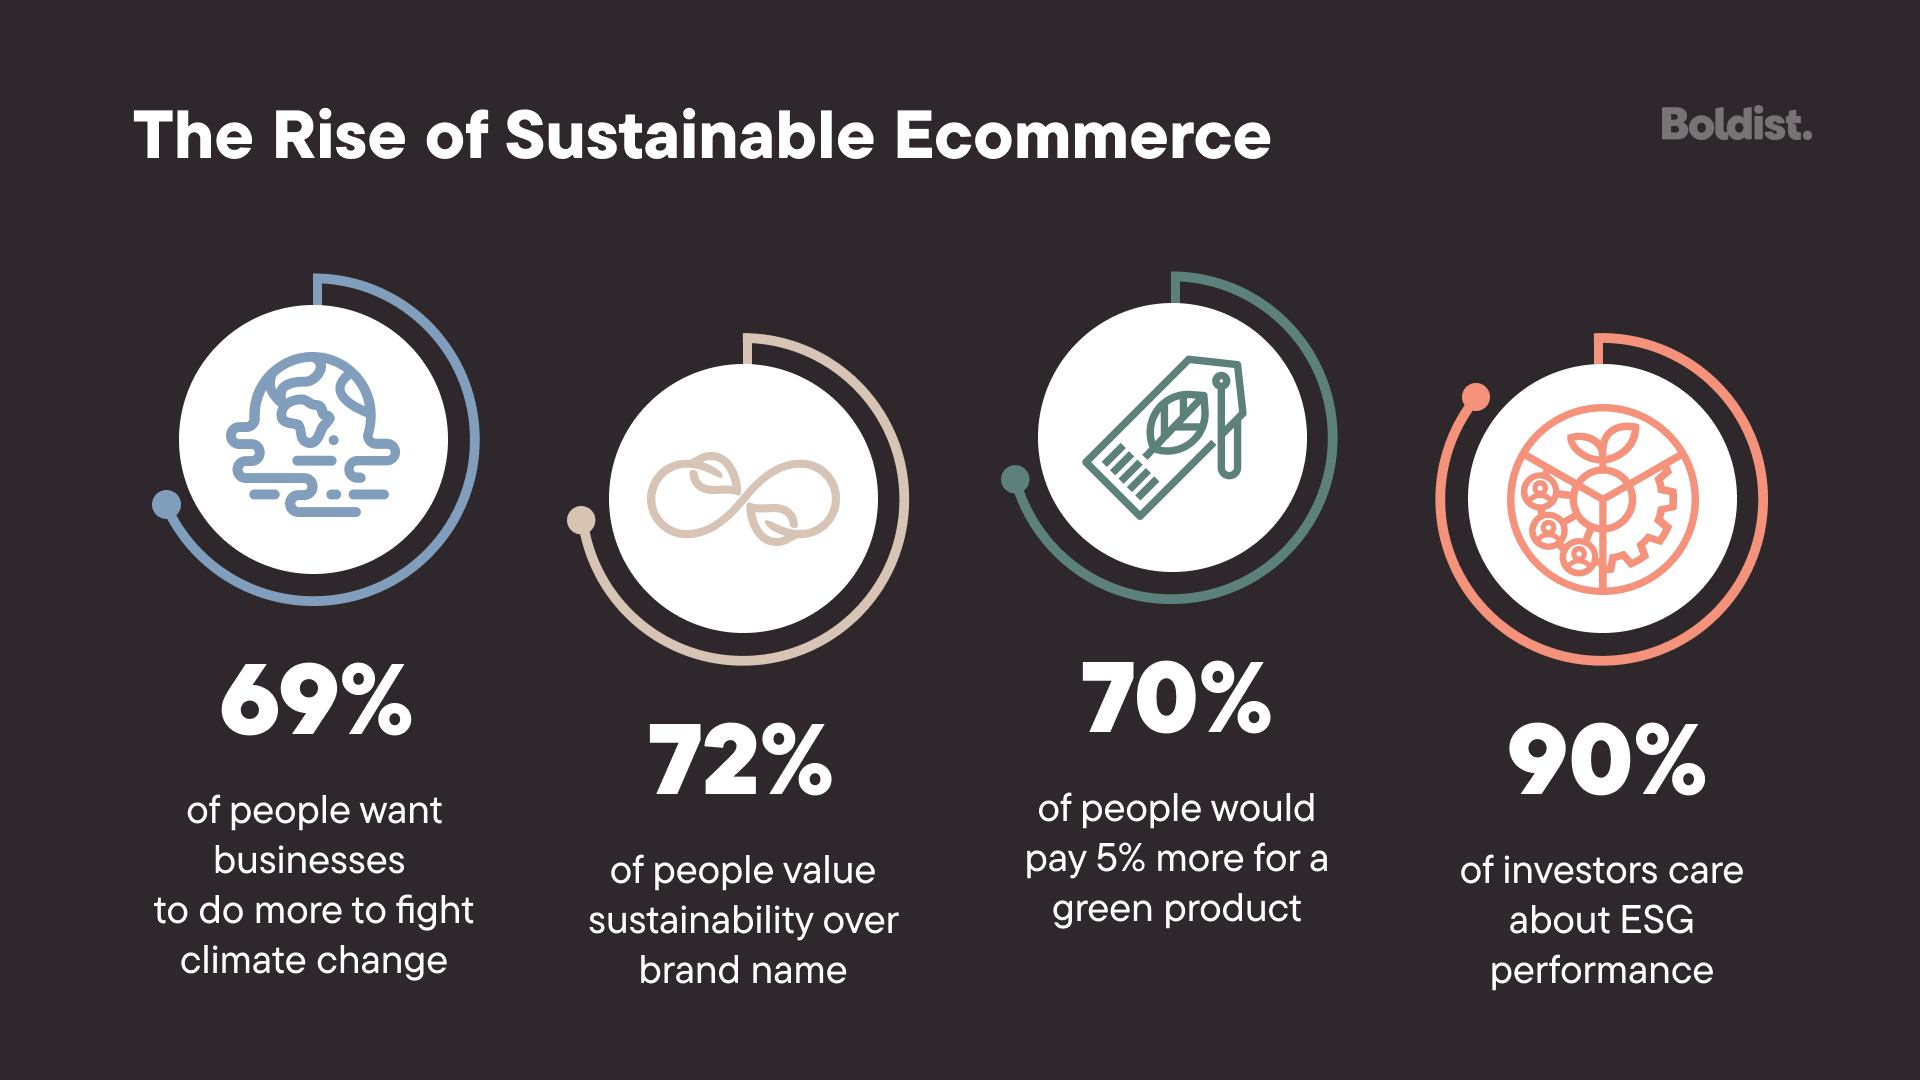 4 statistics from the article on consumer's sustainable preferences.